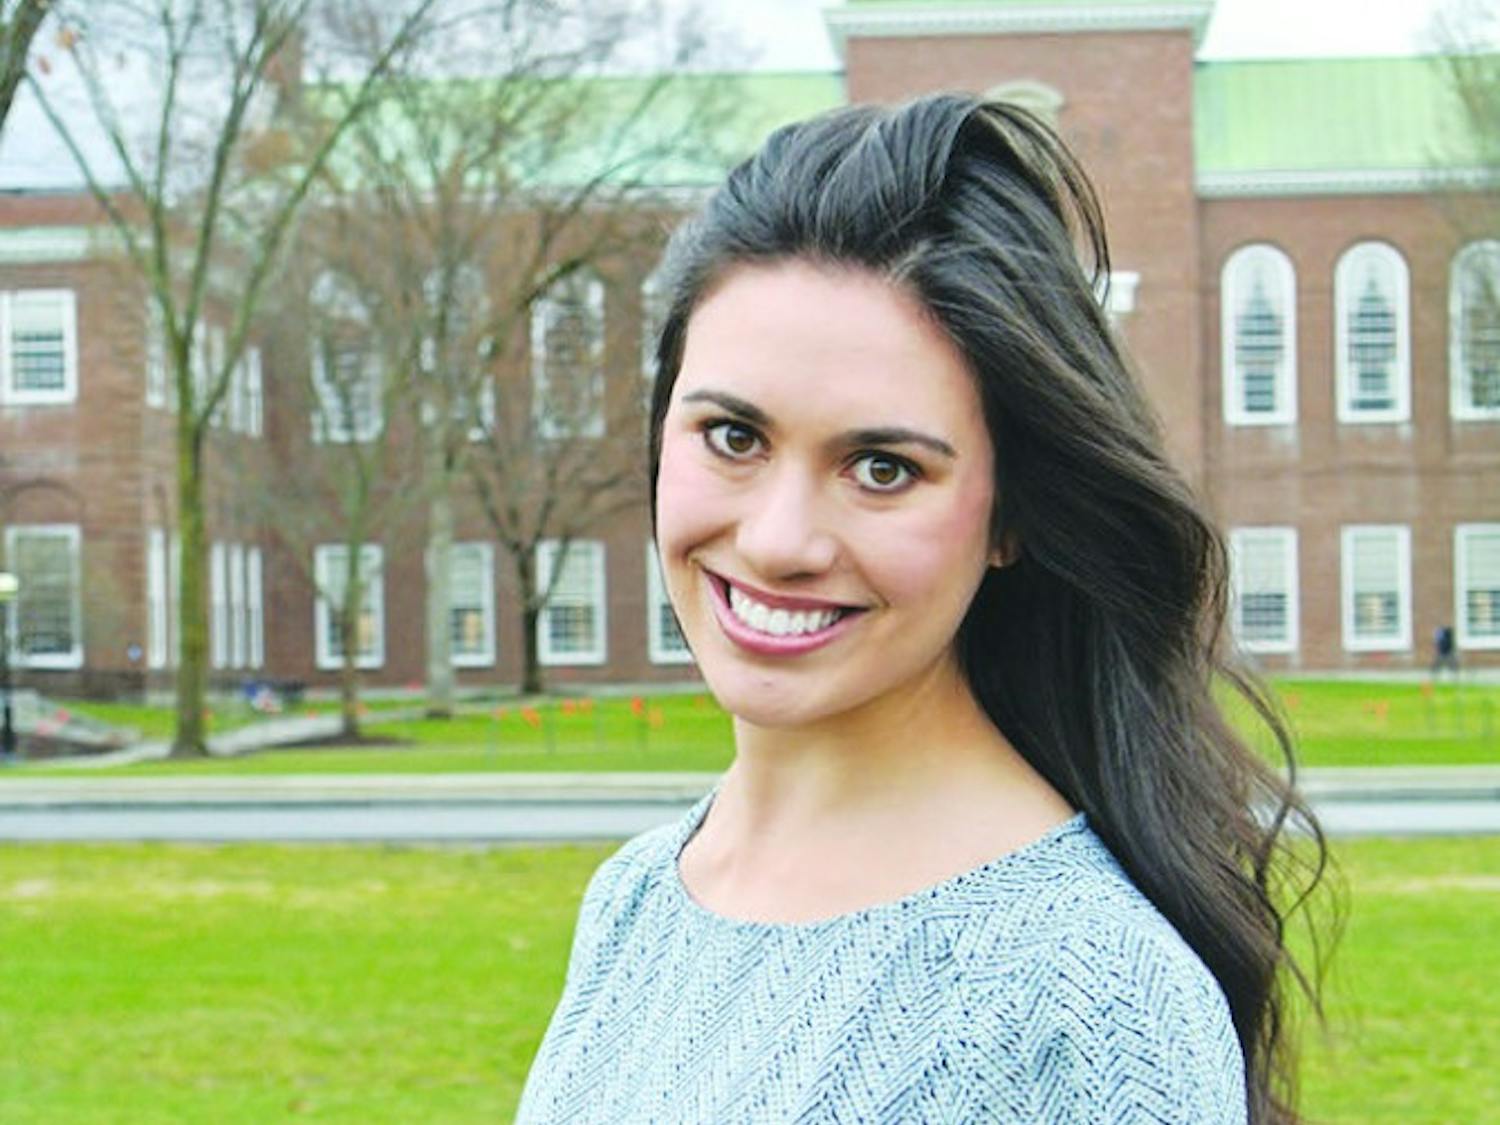 Lindsay MacMillan '16 reflects on the lessons that she's learned from female friendships throughout her time at Dartmouth.